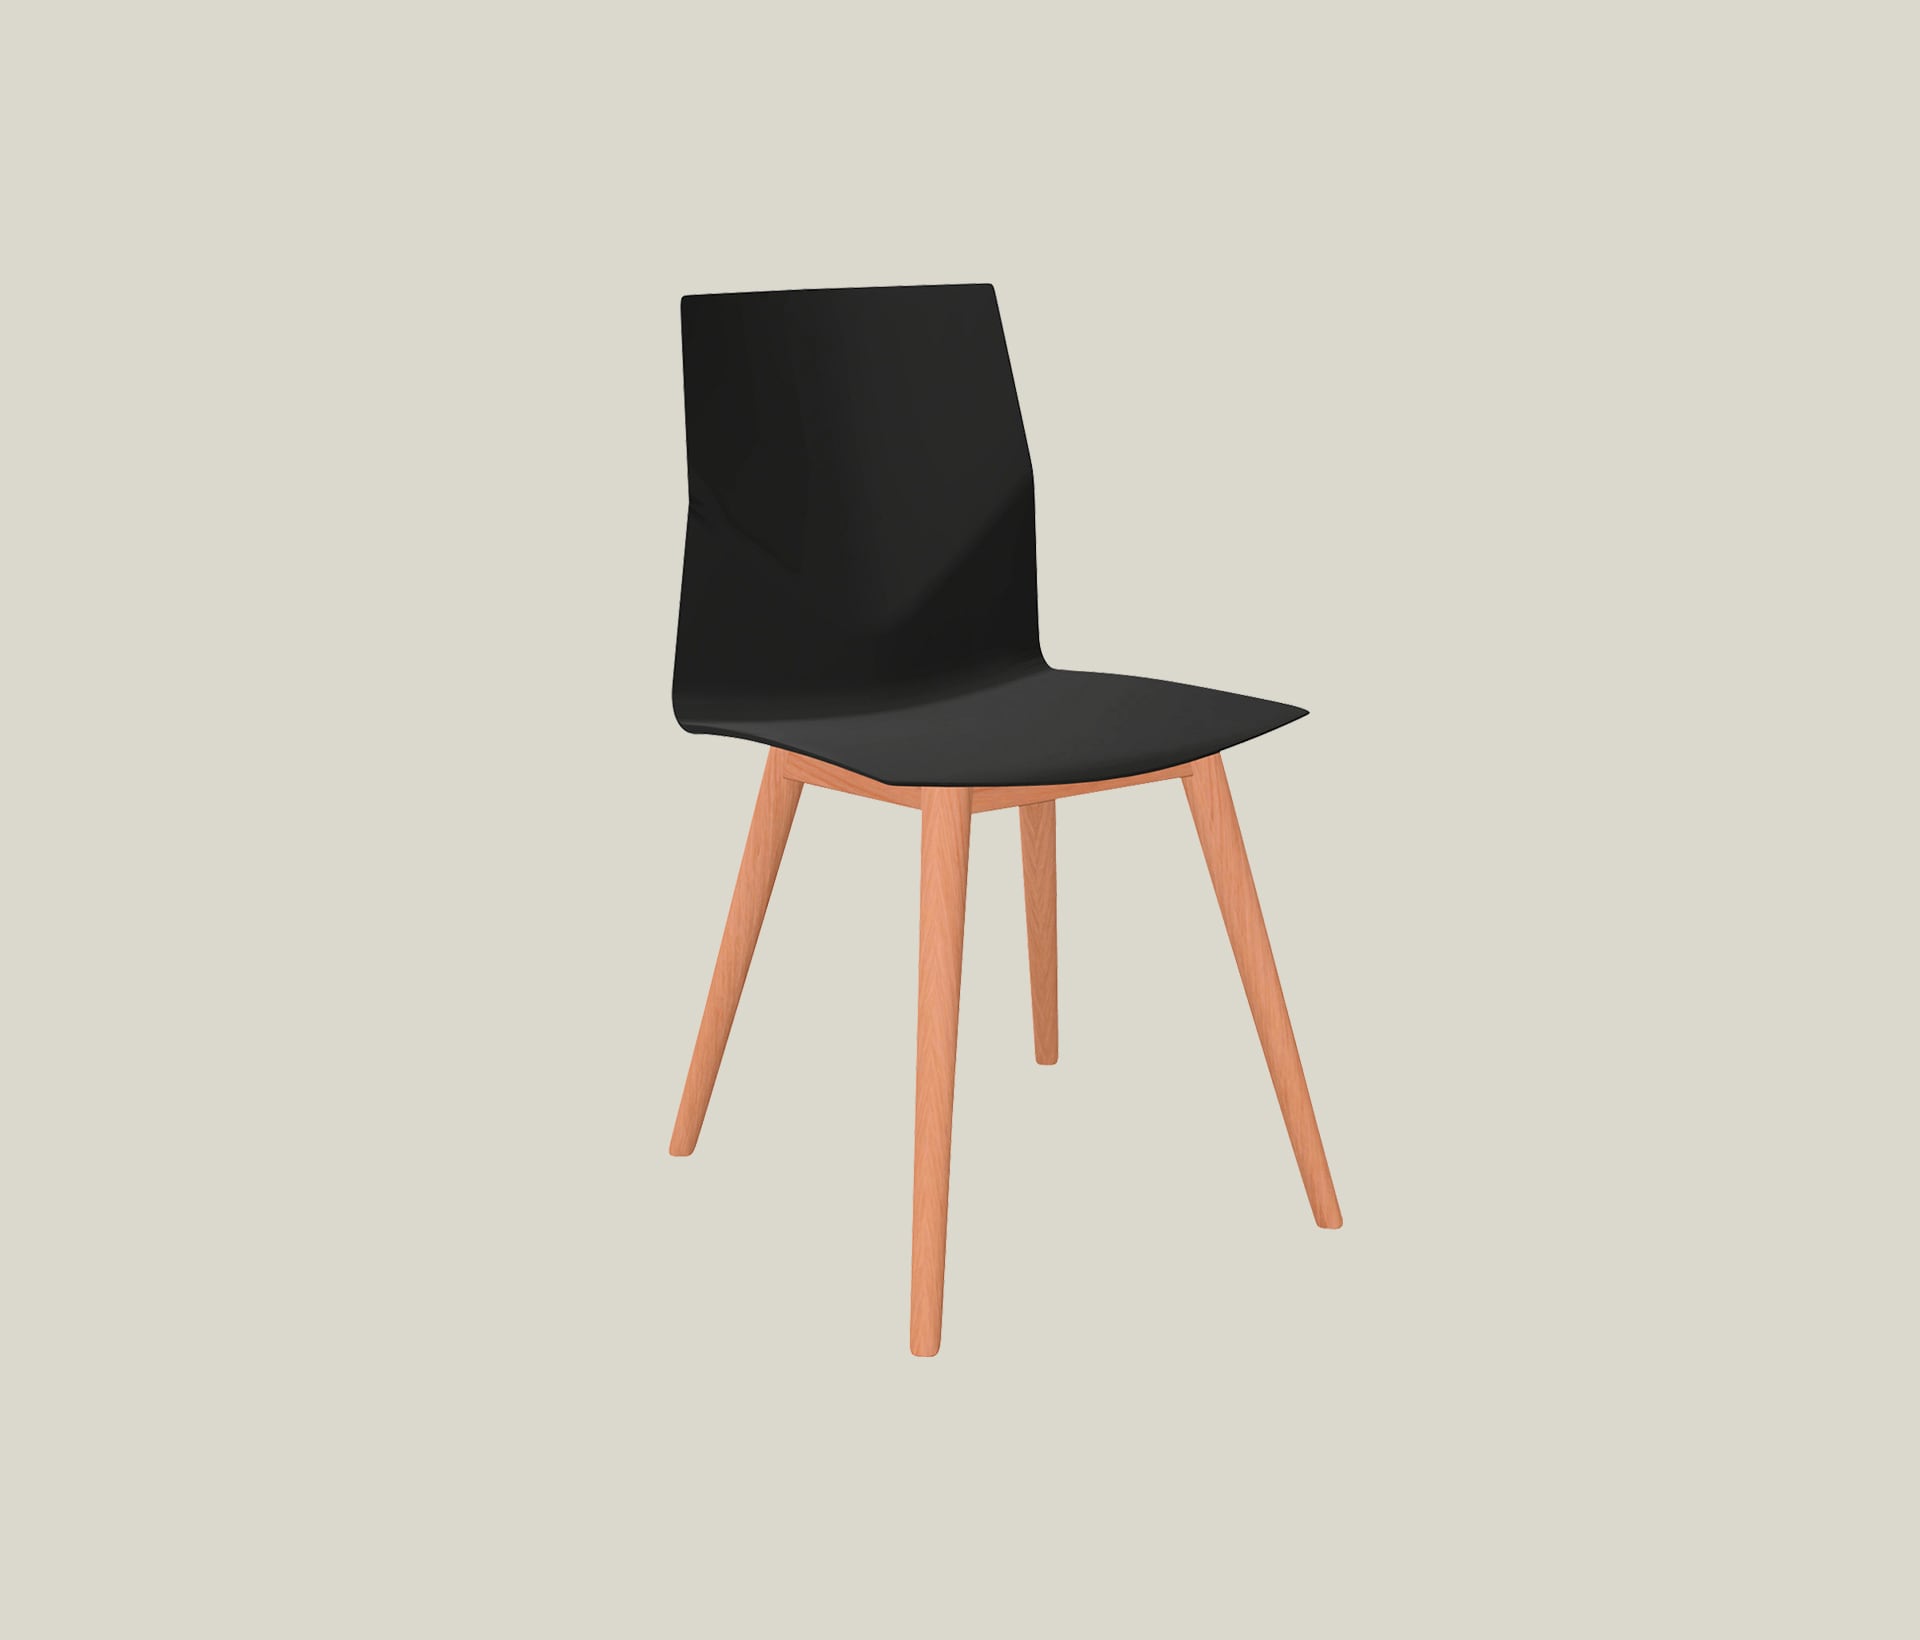 A black chair with wooden legs on a white background.